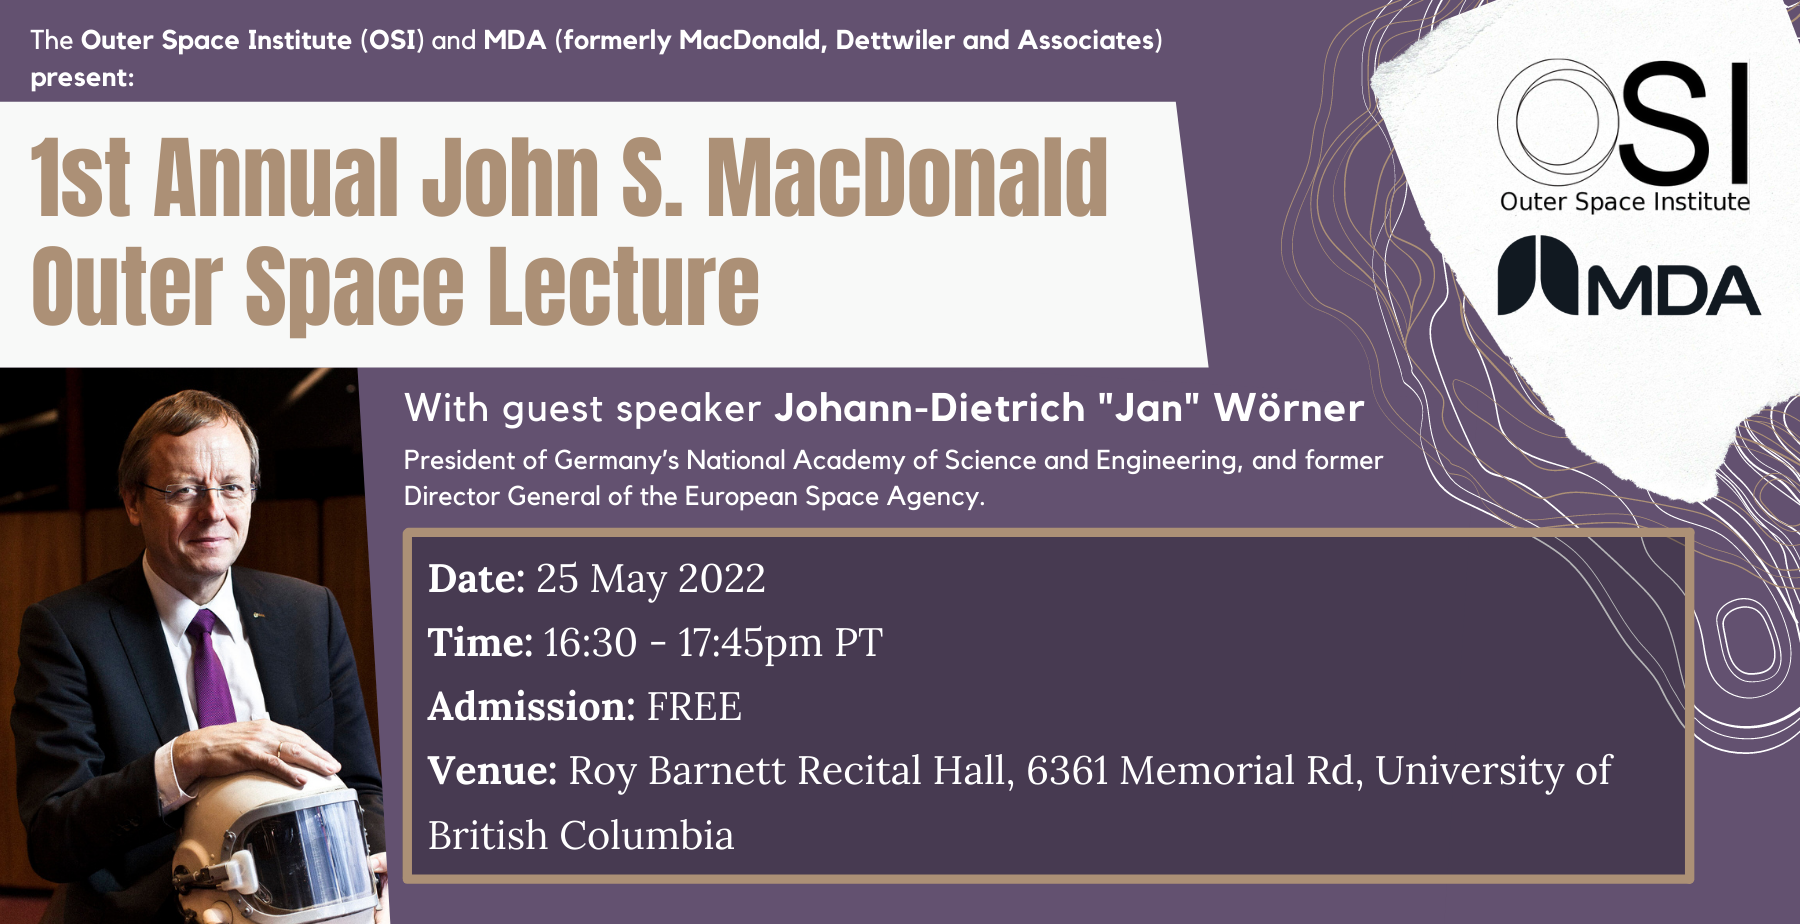 1st Annual John S. MacDonald Outer Space Lecture